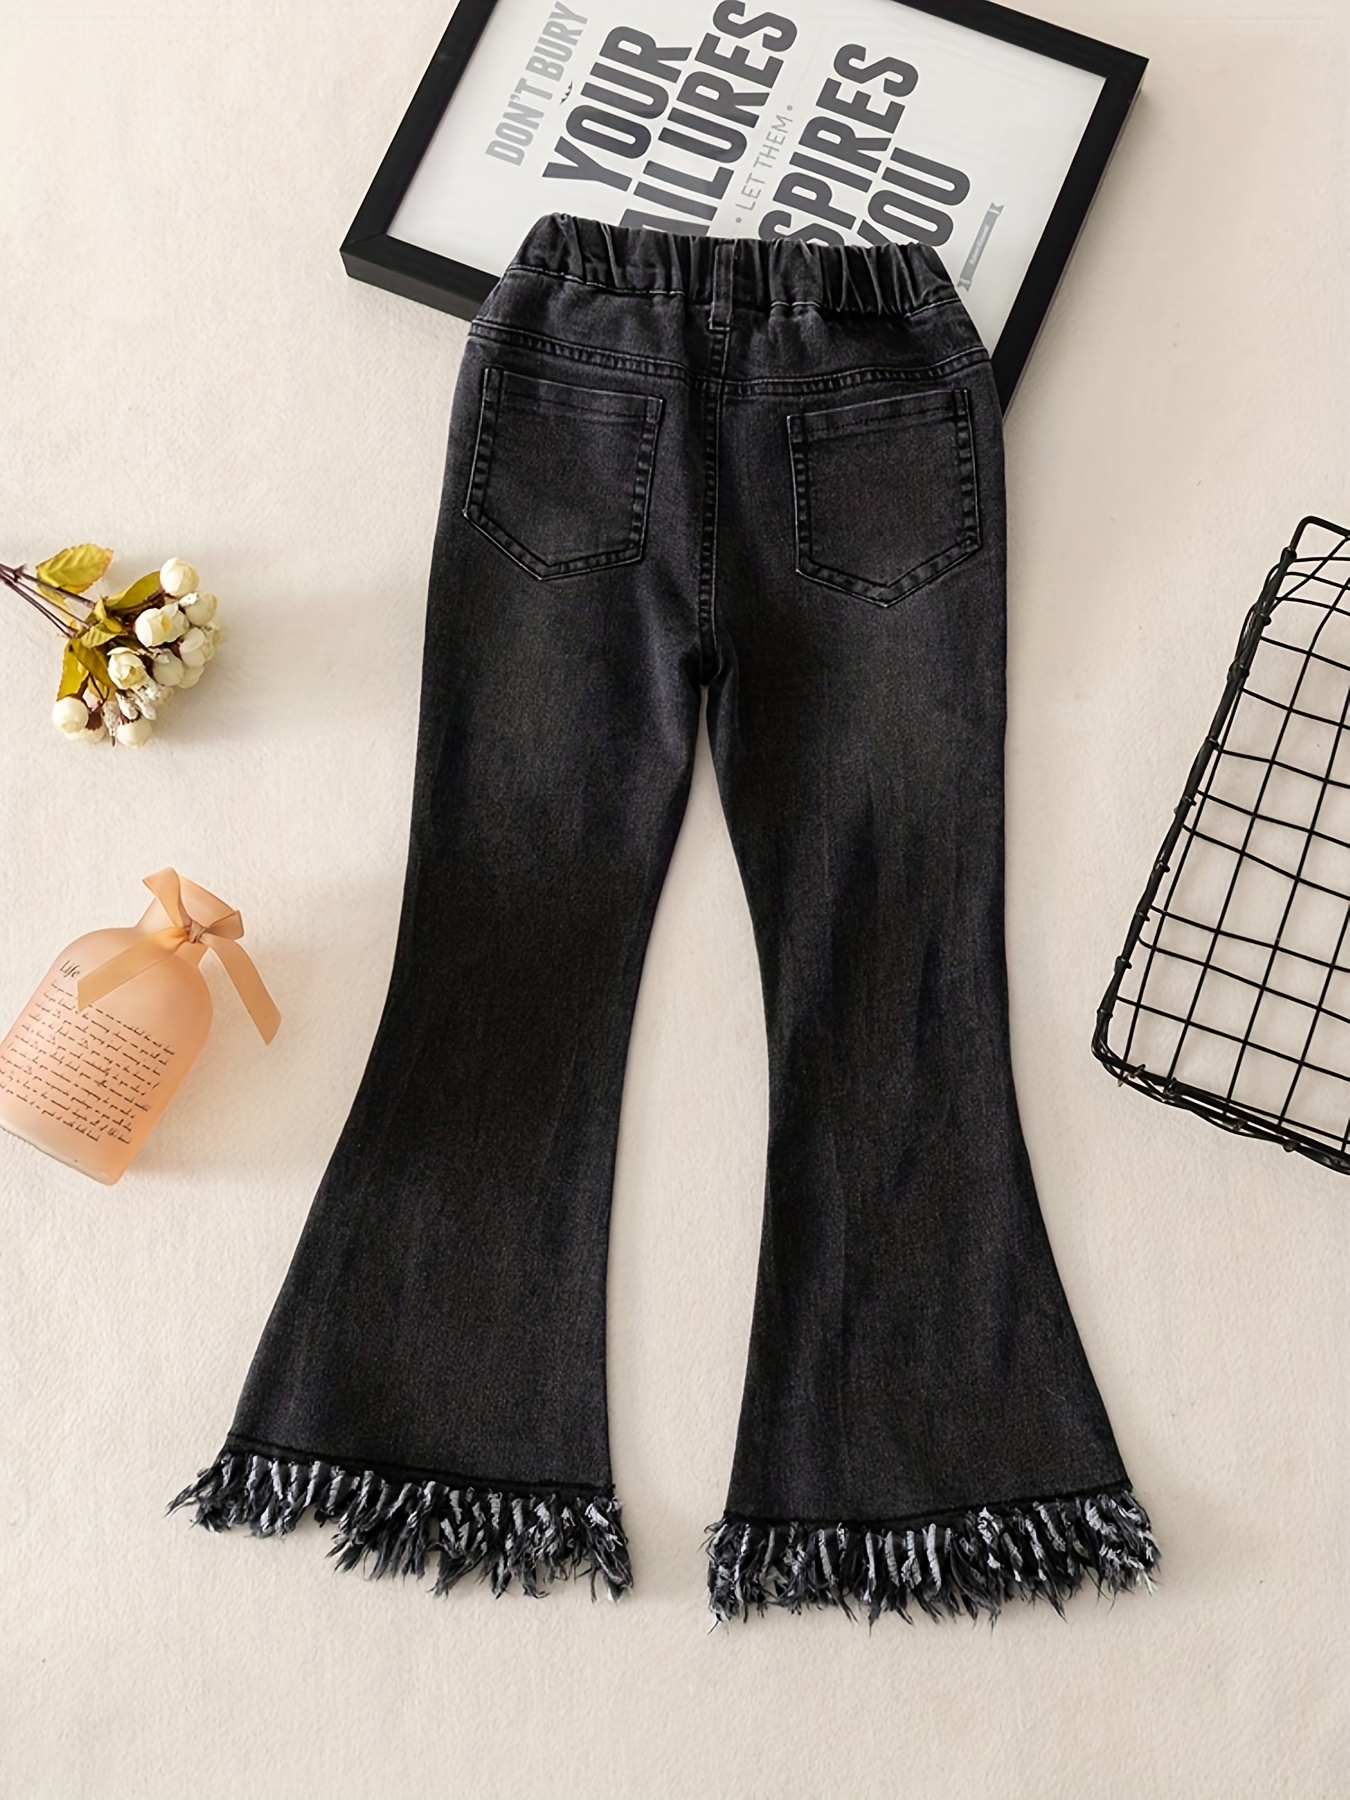 Teenage Girls Flare Pants Spring New Black Casual All-match Pants for Kids  Elastic Waist Fashion Children Trousers 10 12 Years